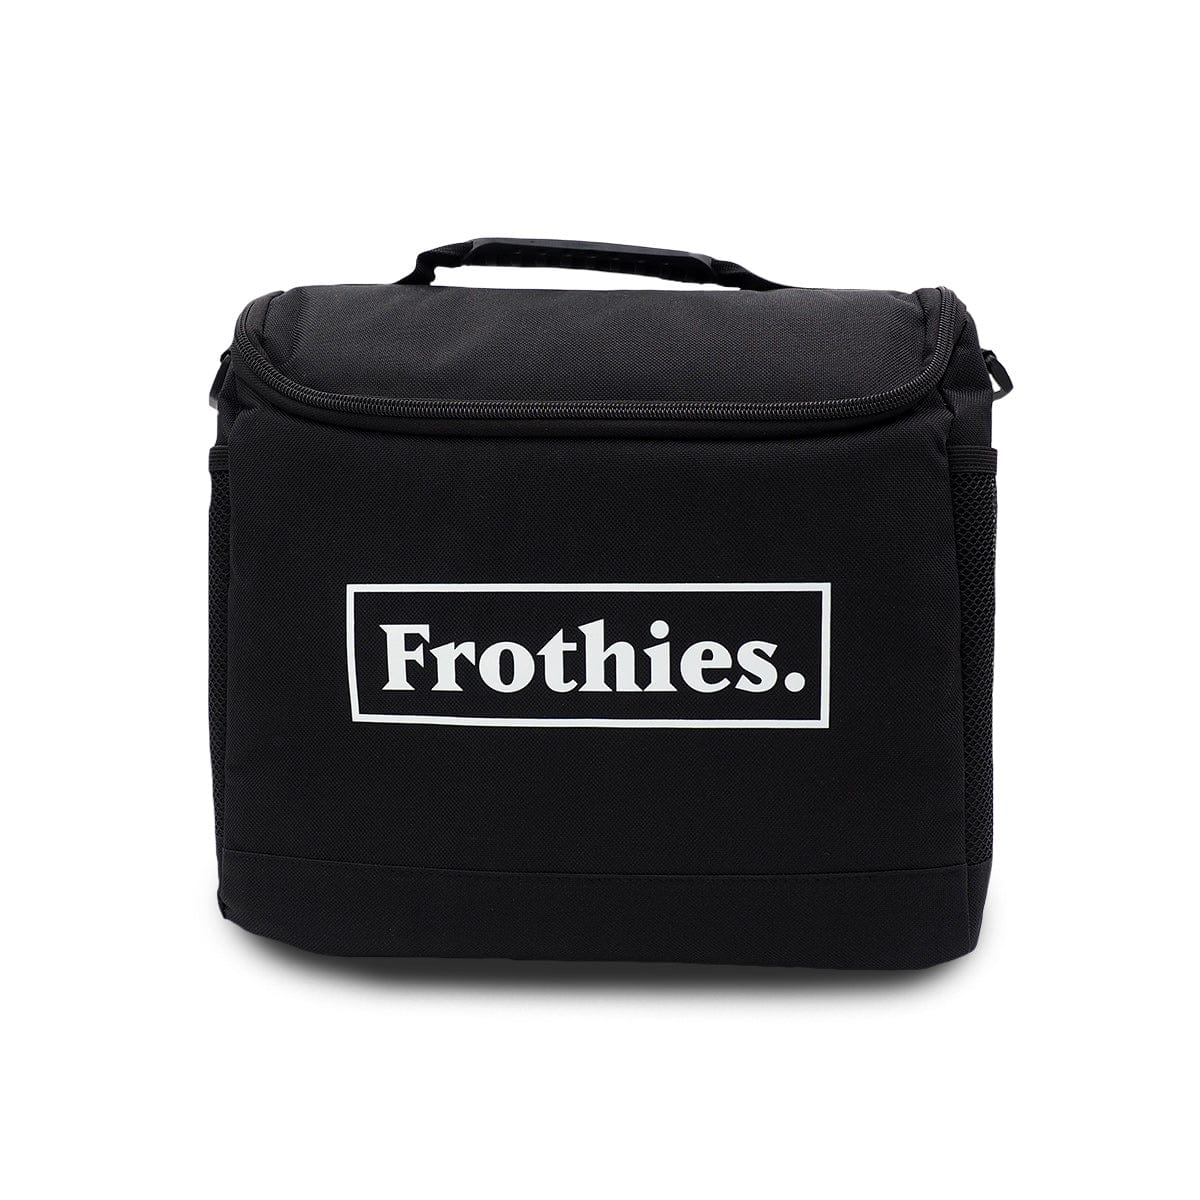 Frothies Cooler Bag Cooler Frothies